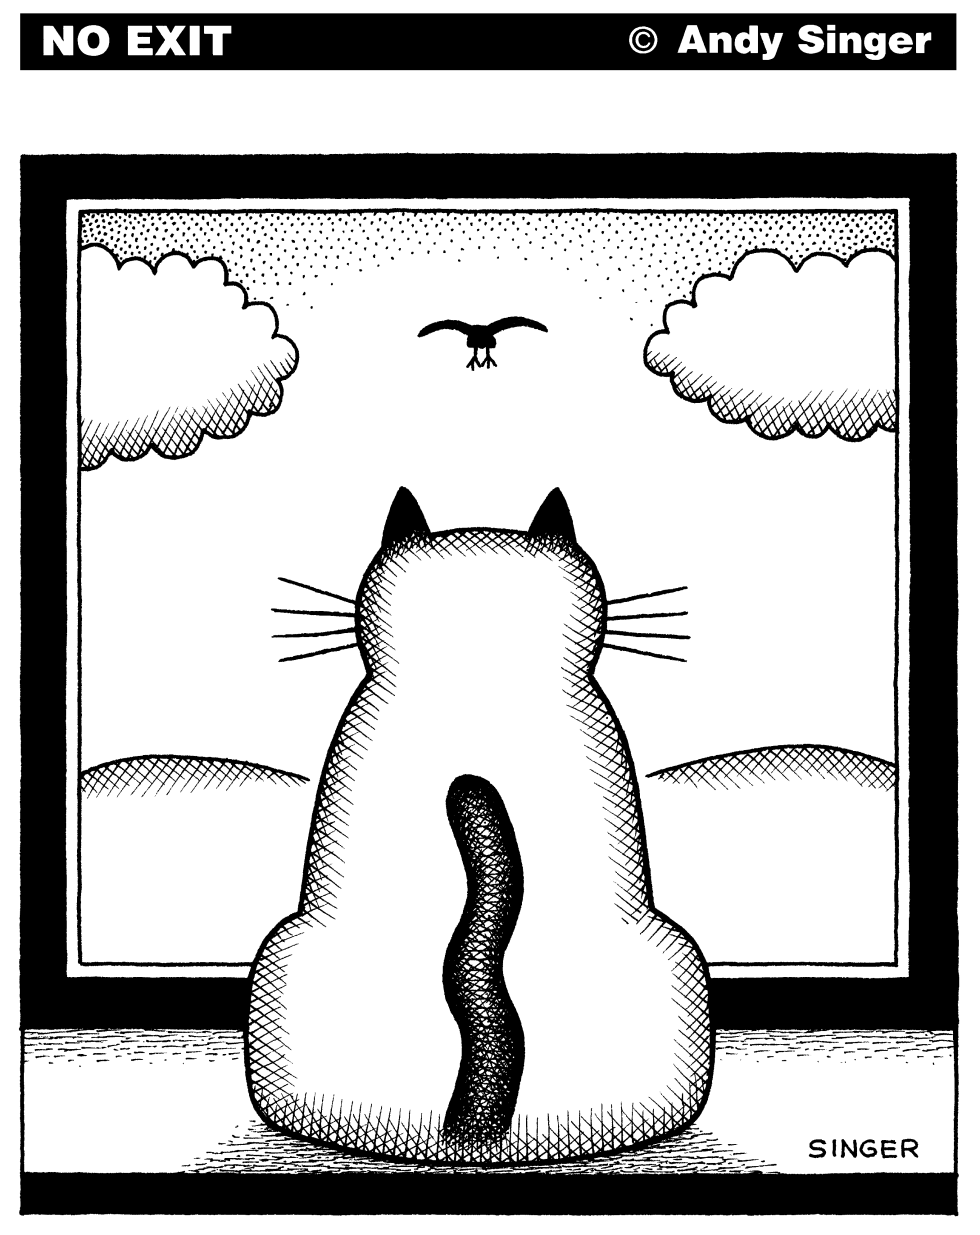 CAT AT WINDOW by Andy Singer